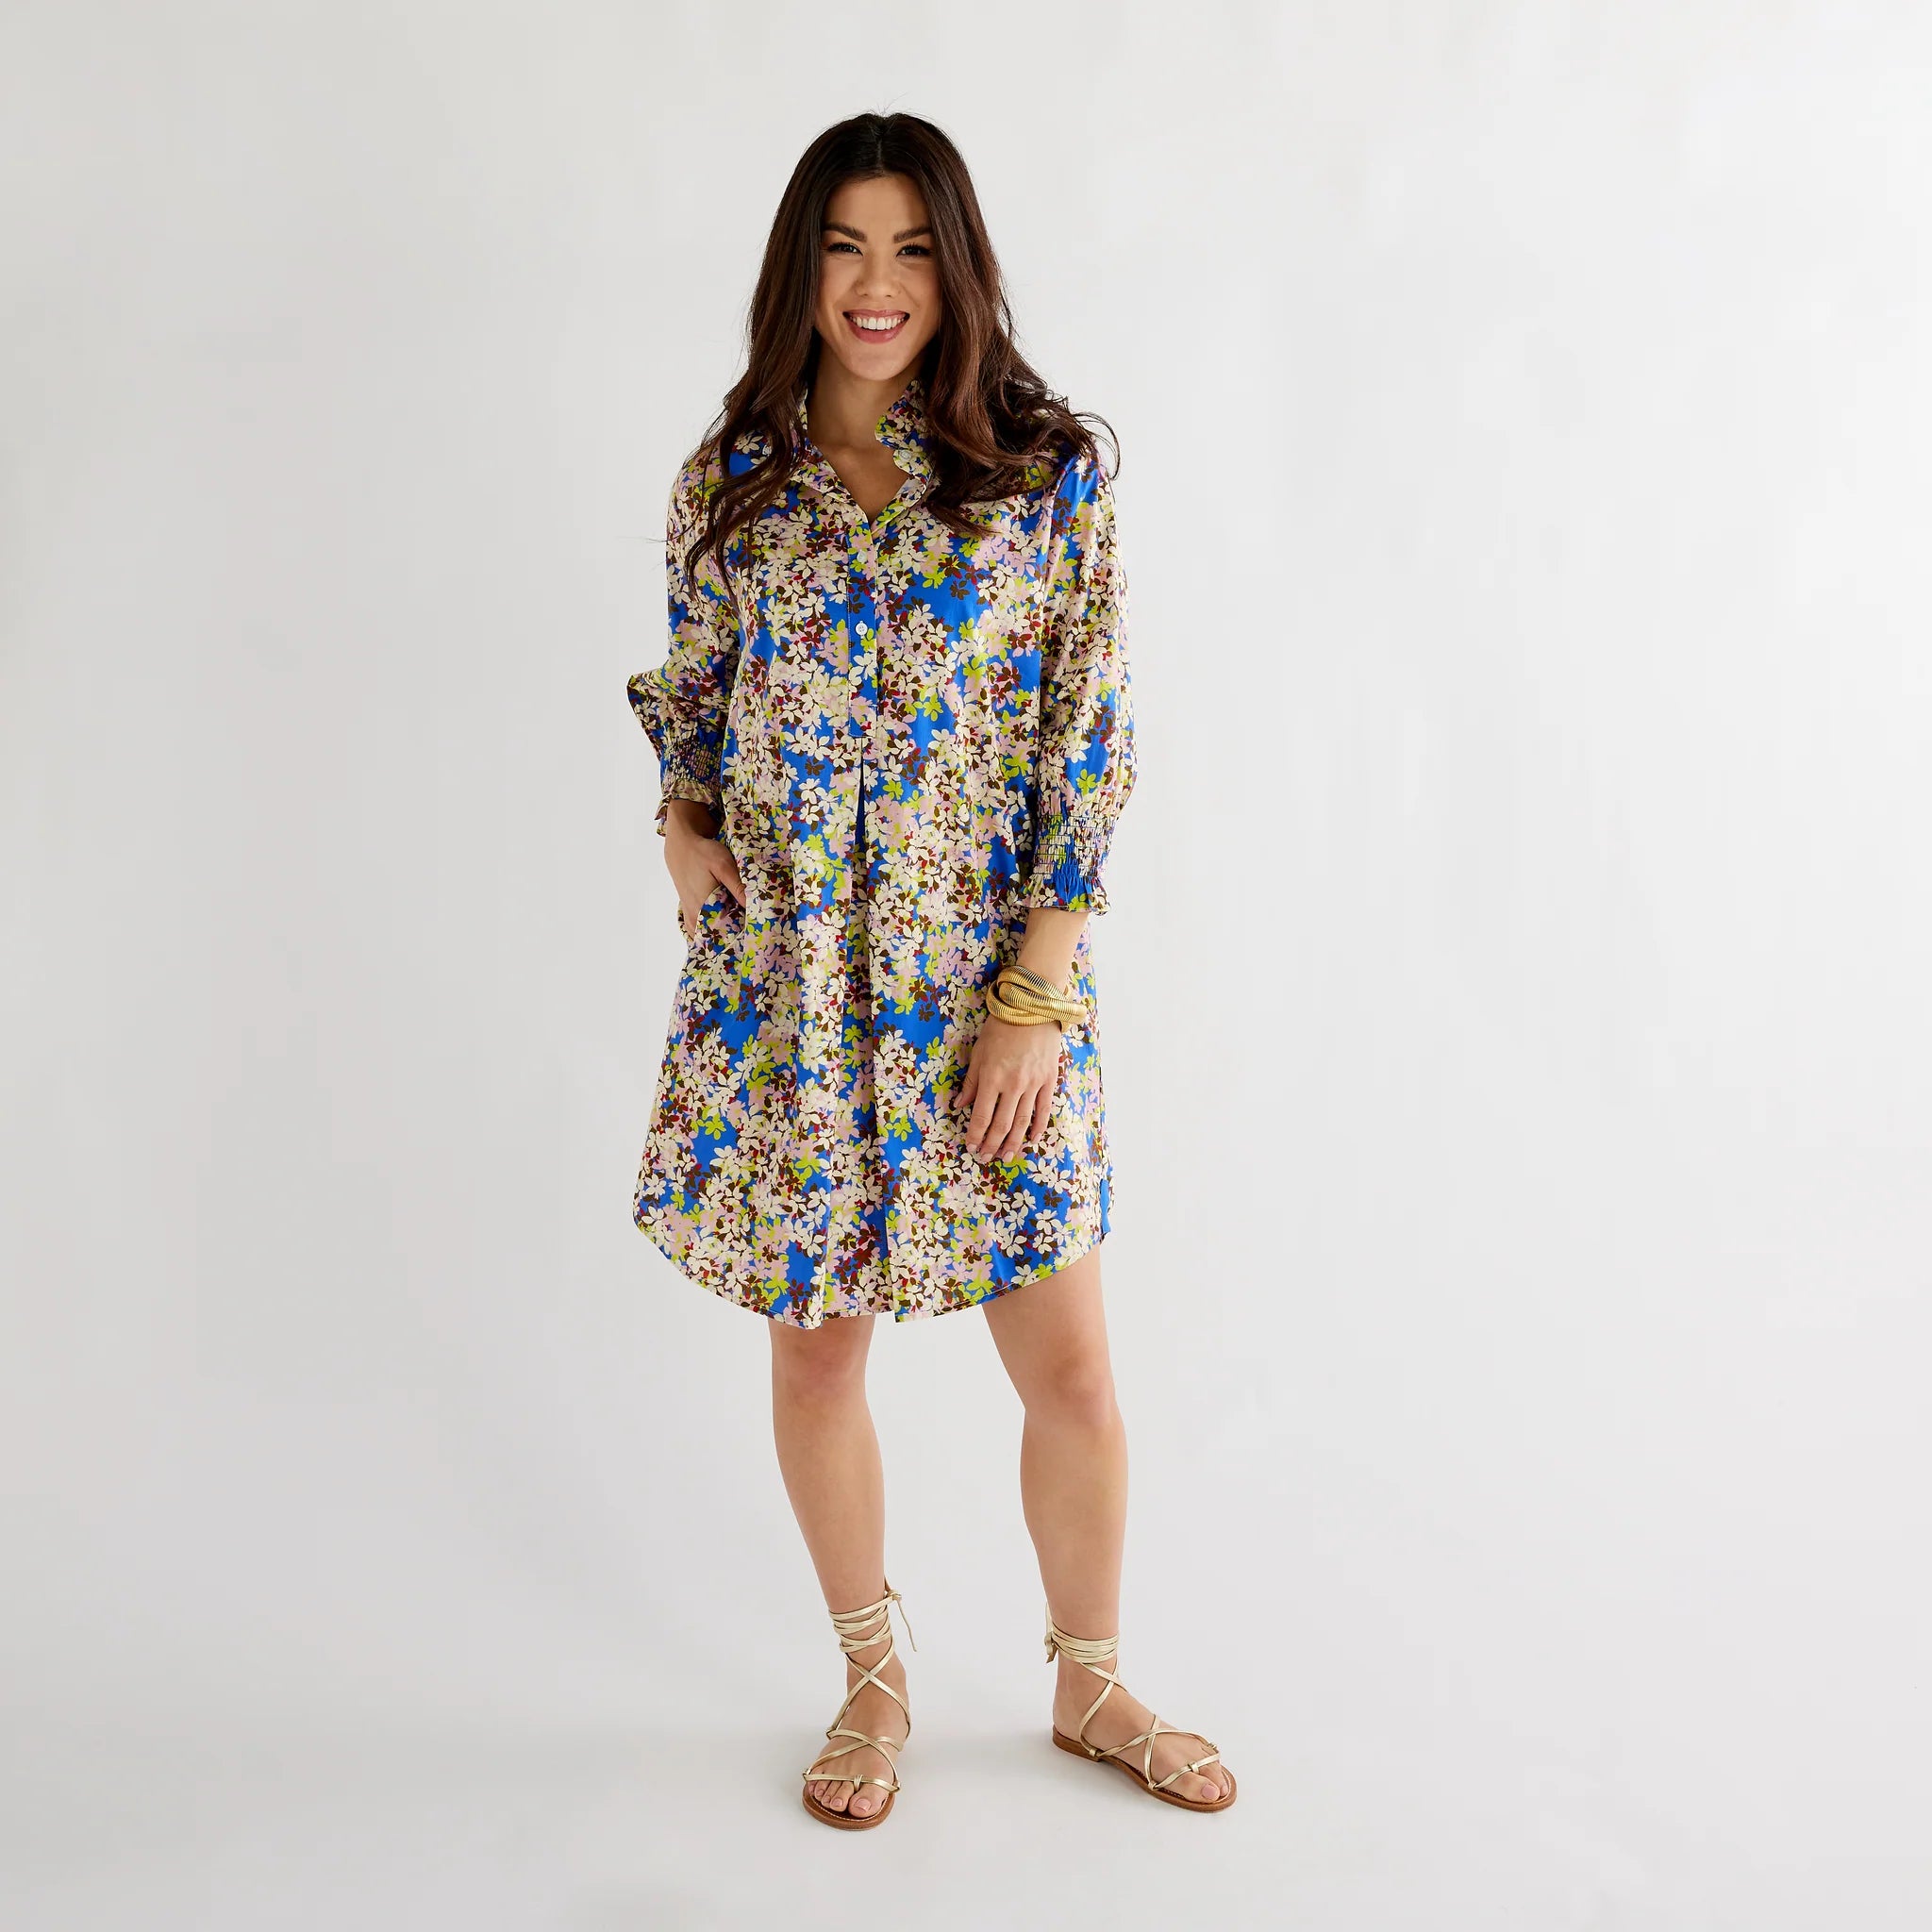 Kimberly Floral Dress in Blue Multi